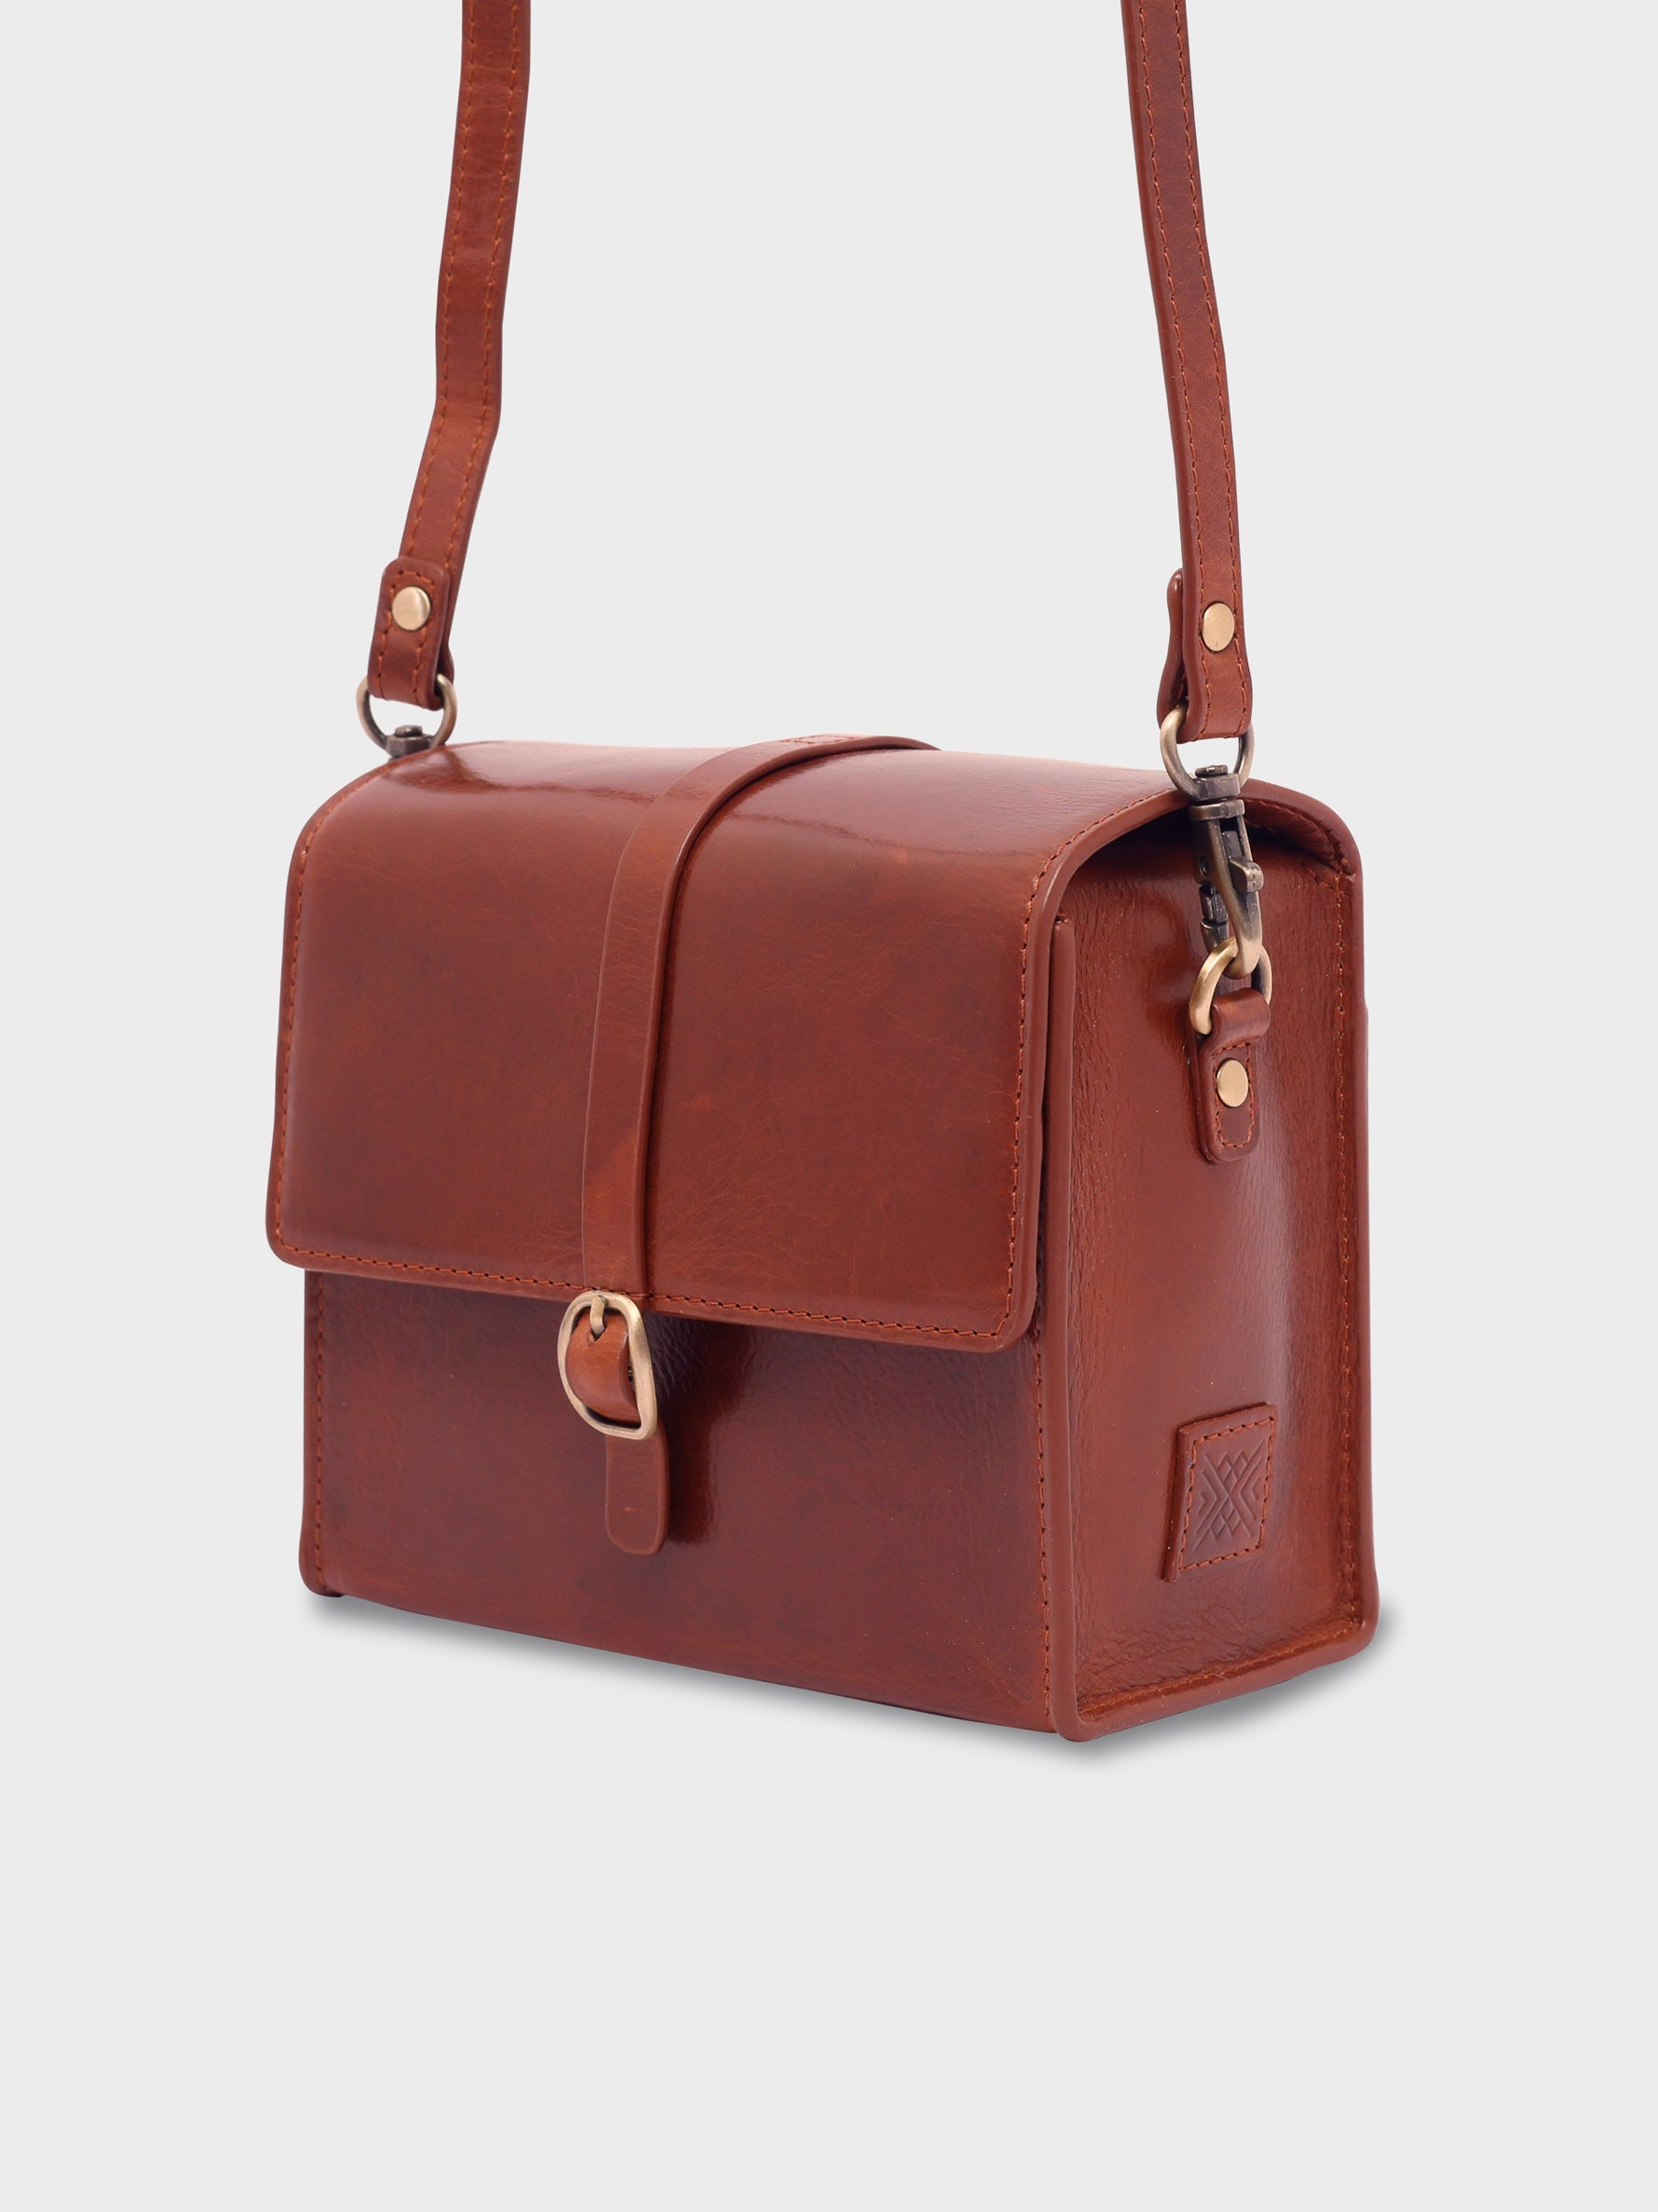 Handcrafted Genuine Vegetable Tanned Leather Piccolo Box Bag Vintage Brown for Women Tan & Loom